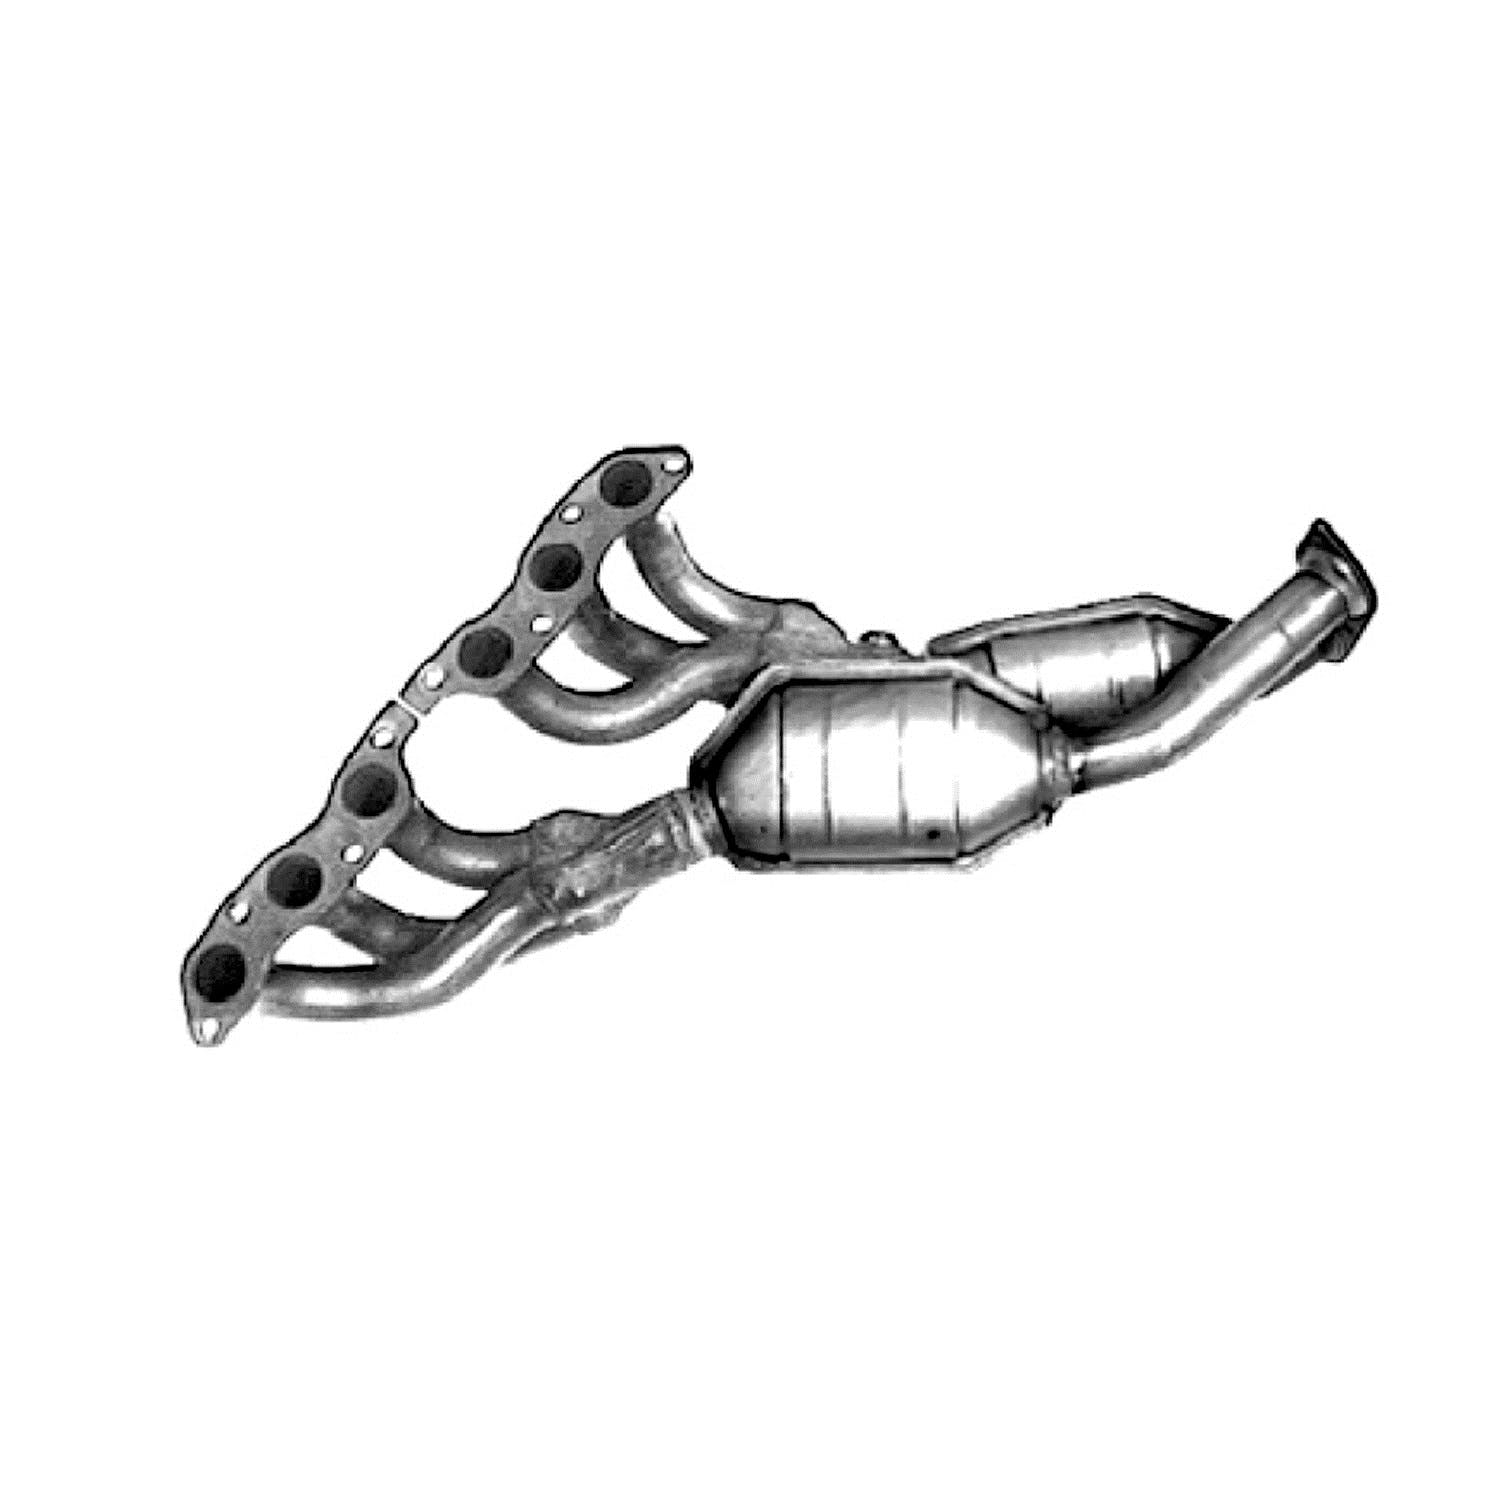 Flowmaster Catalytic Converters 2054276 Catalytic Converter - Direct Fit - 49 State